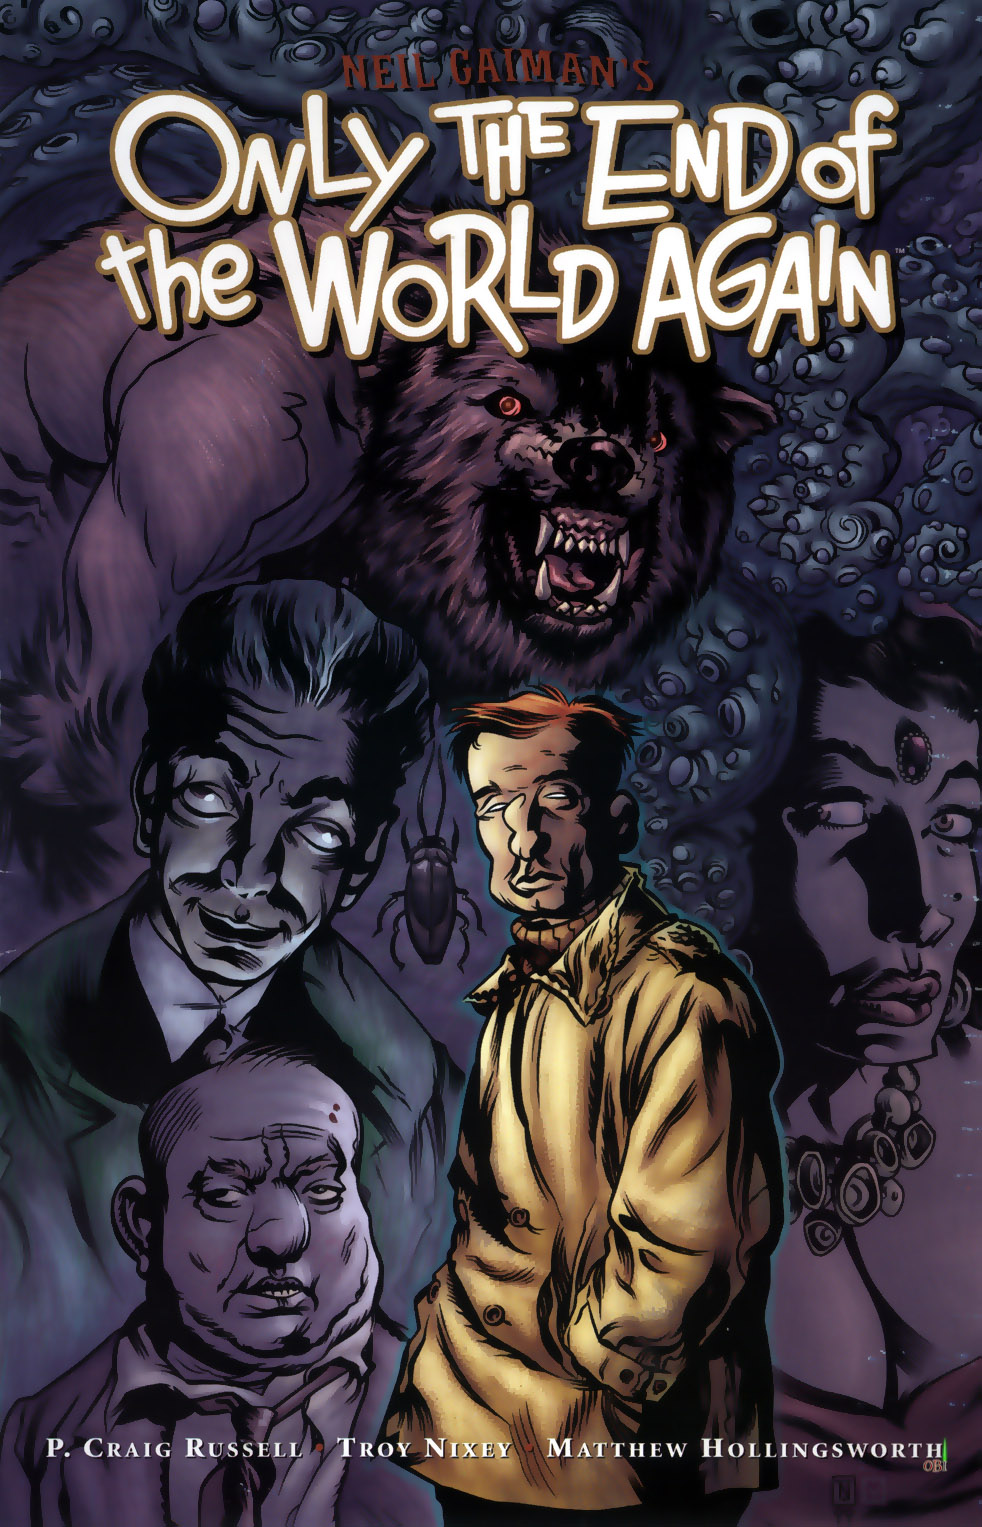 Read online Only the End of the World Again comic -  Issue # Full - 1